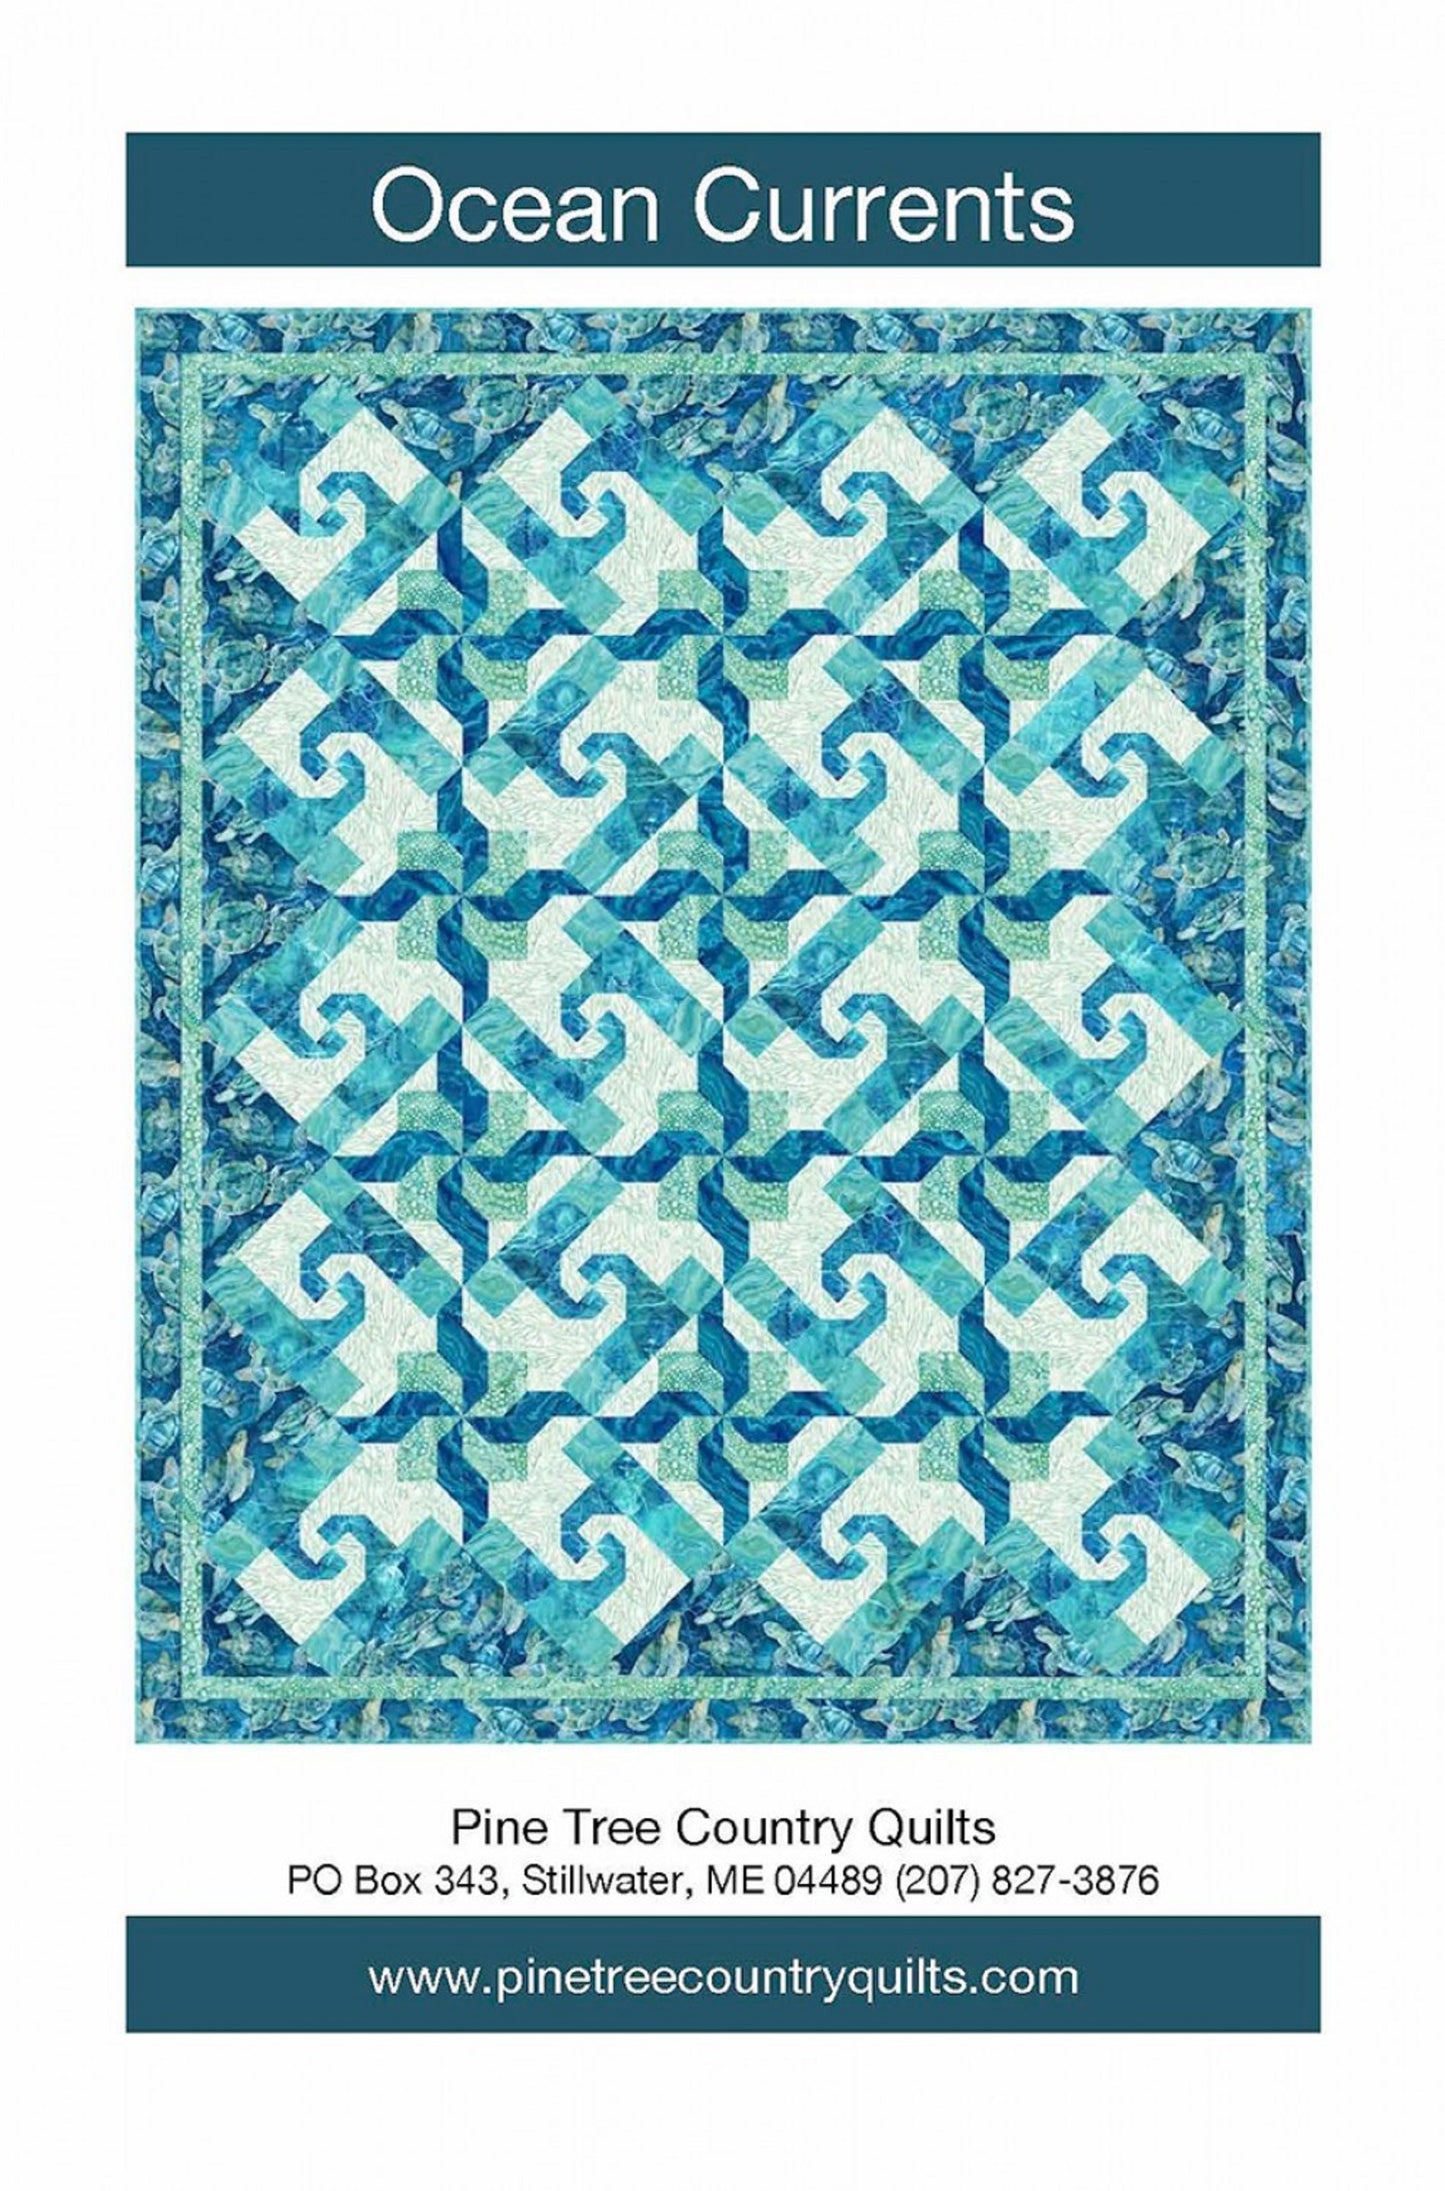 Ocean Currents Quilt Pattern by Pine Tree Country Quilts